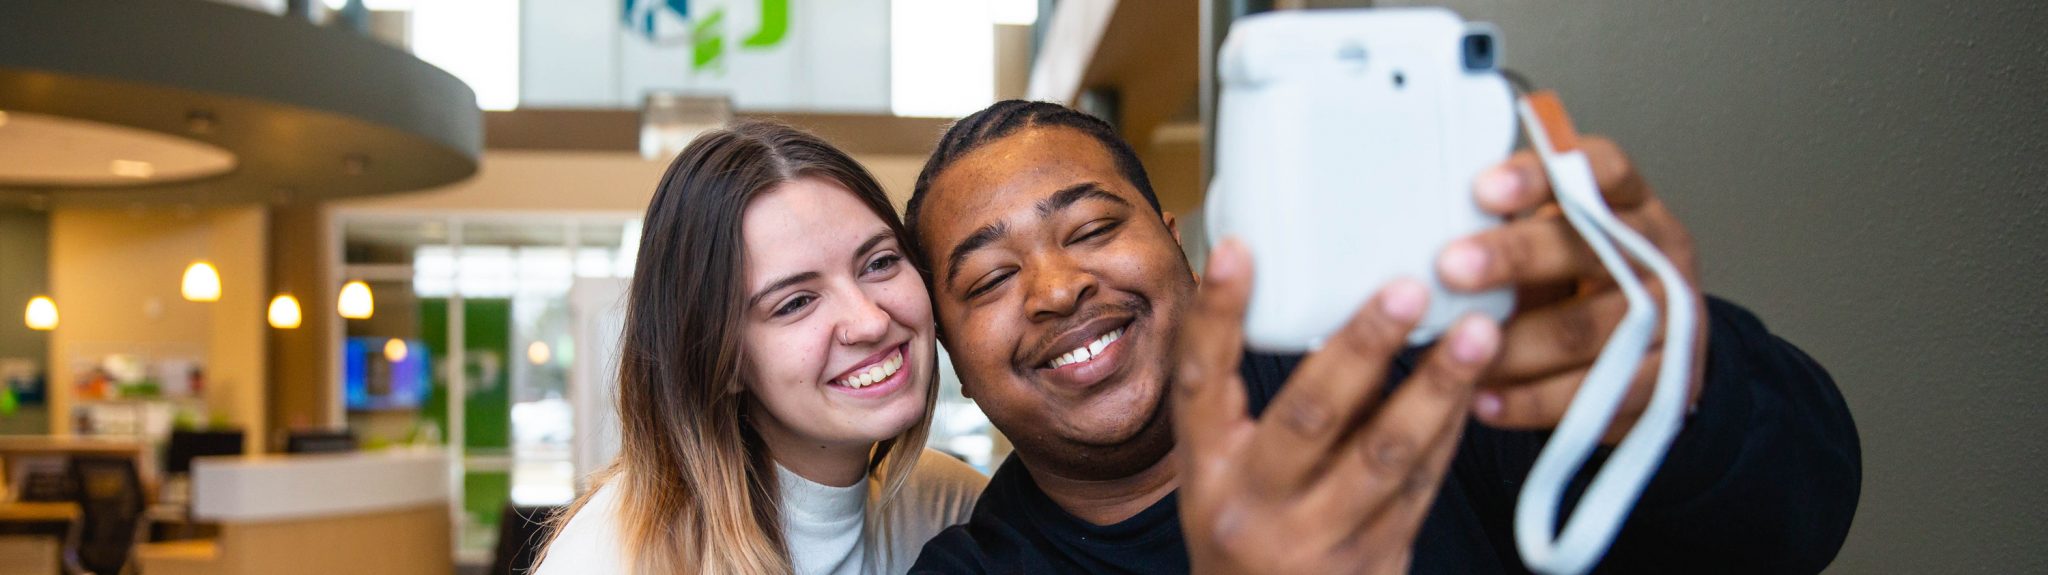 two students taking a selfie with a camera